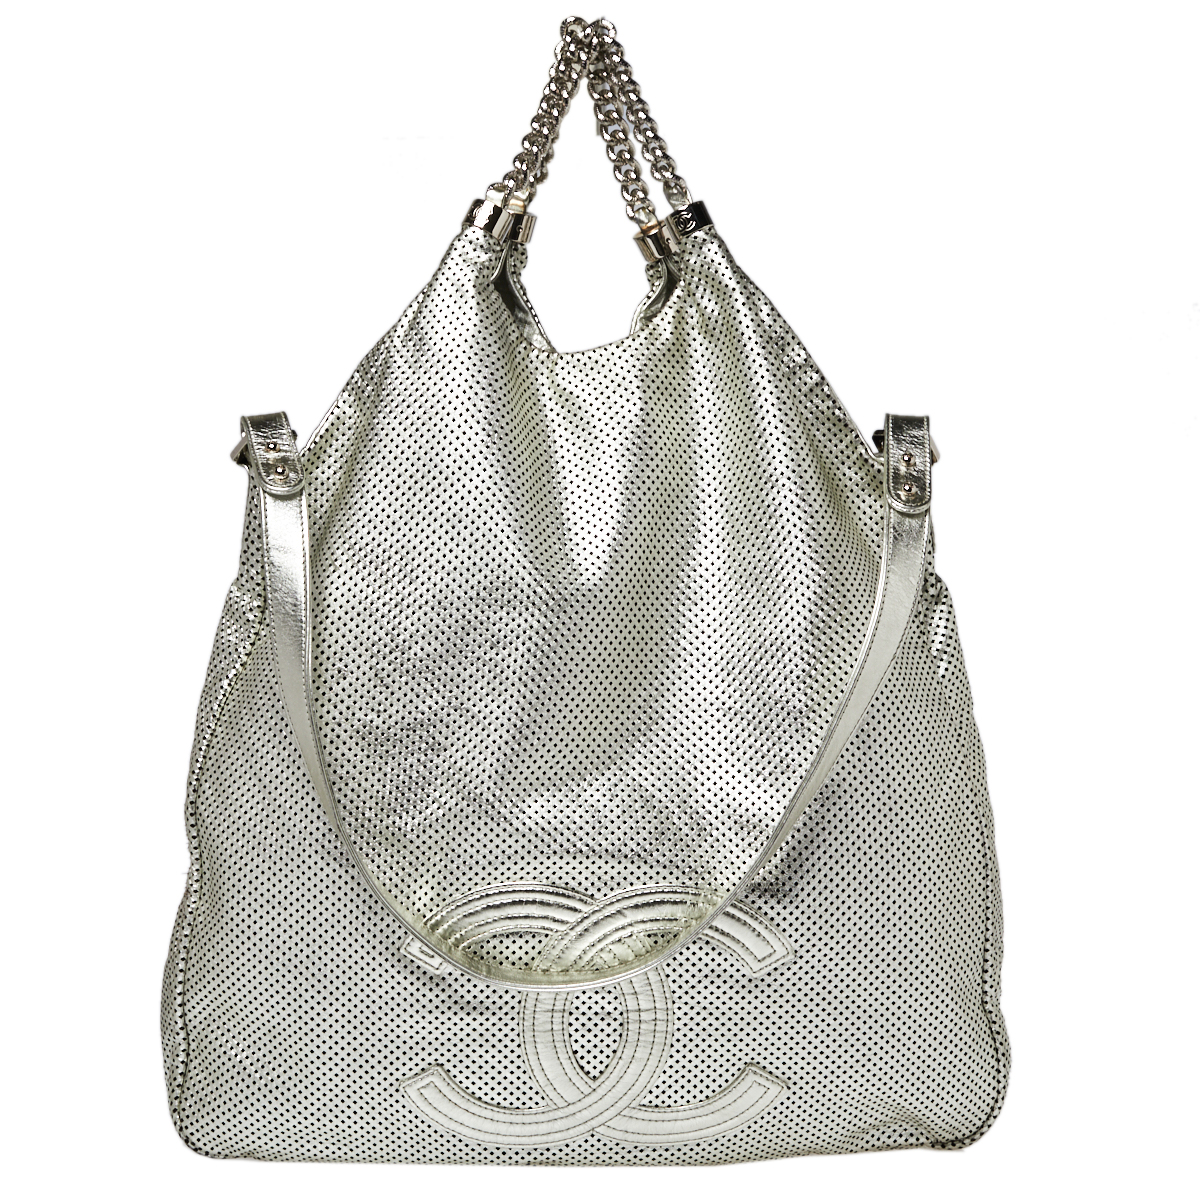 Pre-owned Chanel Metallic Silver Perforated Leather Large Rodeo Drive Hobo